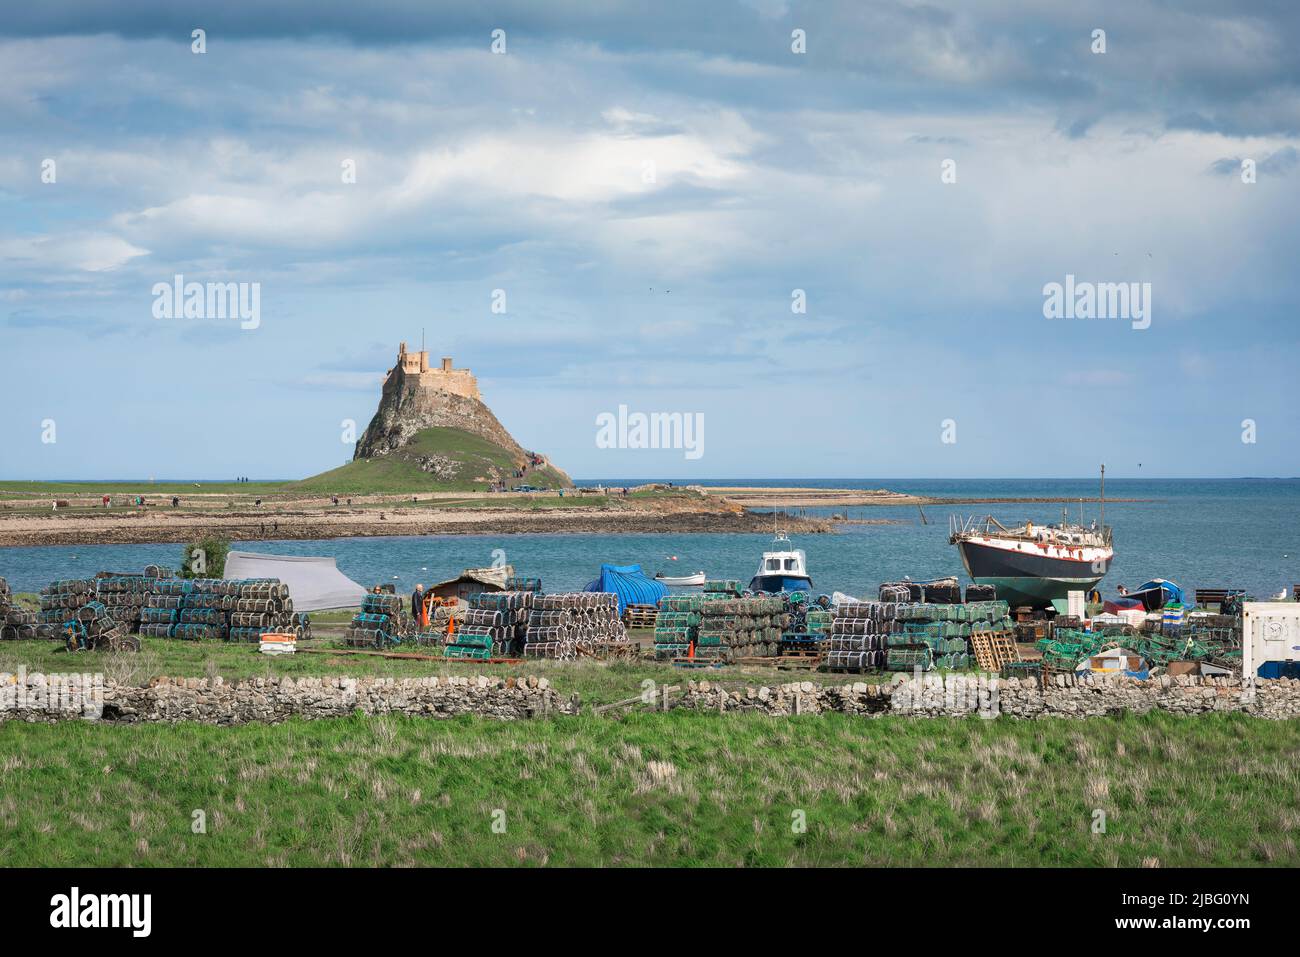 Holy Island Lindisfarne, view of fishing boats and lobster pots in Holy Island harbour with Lindisfarne Castle in the distance, Northumberland, UK Stock Photo